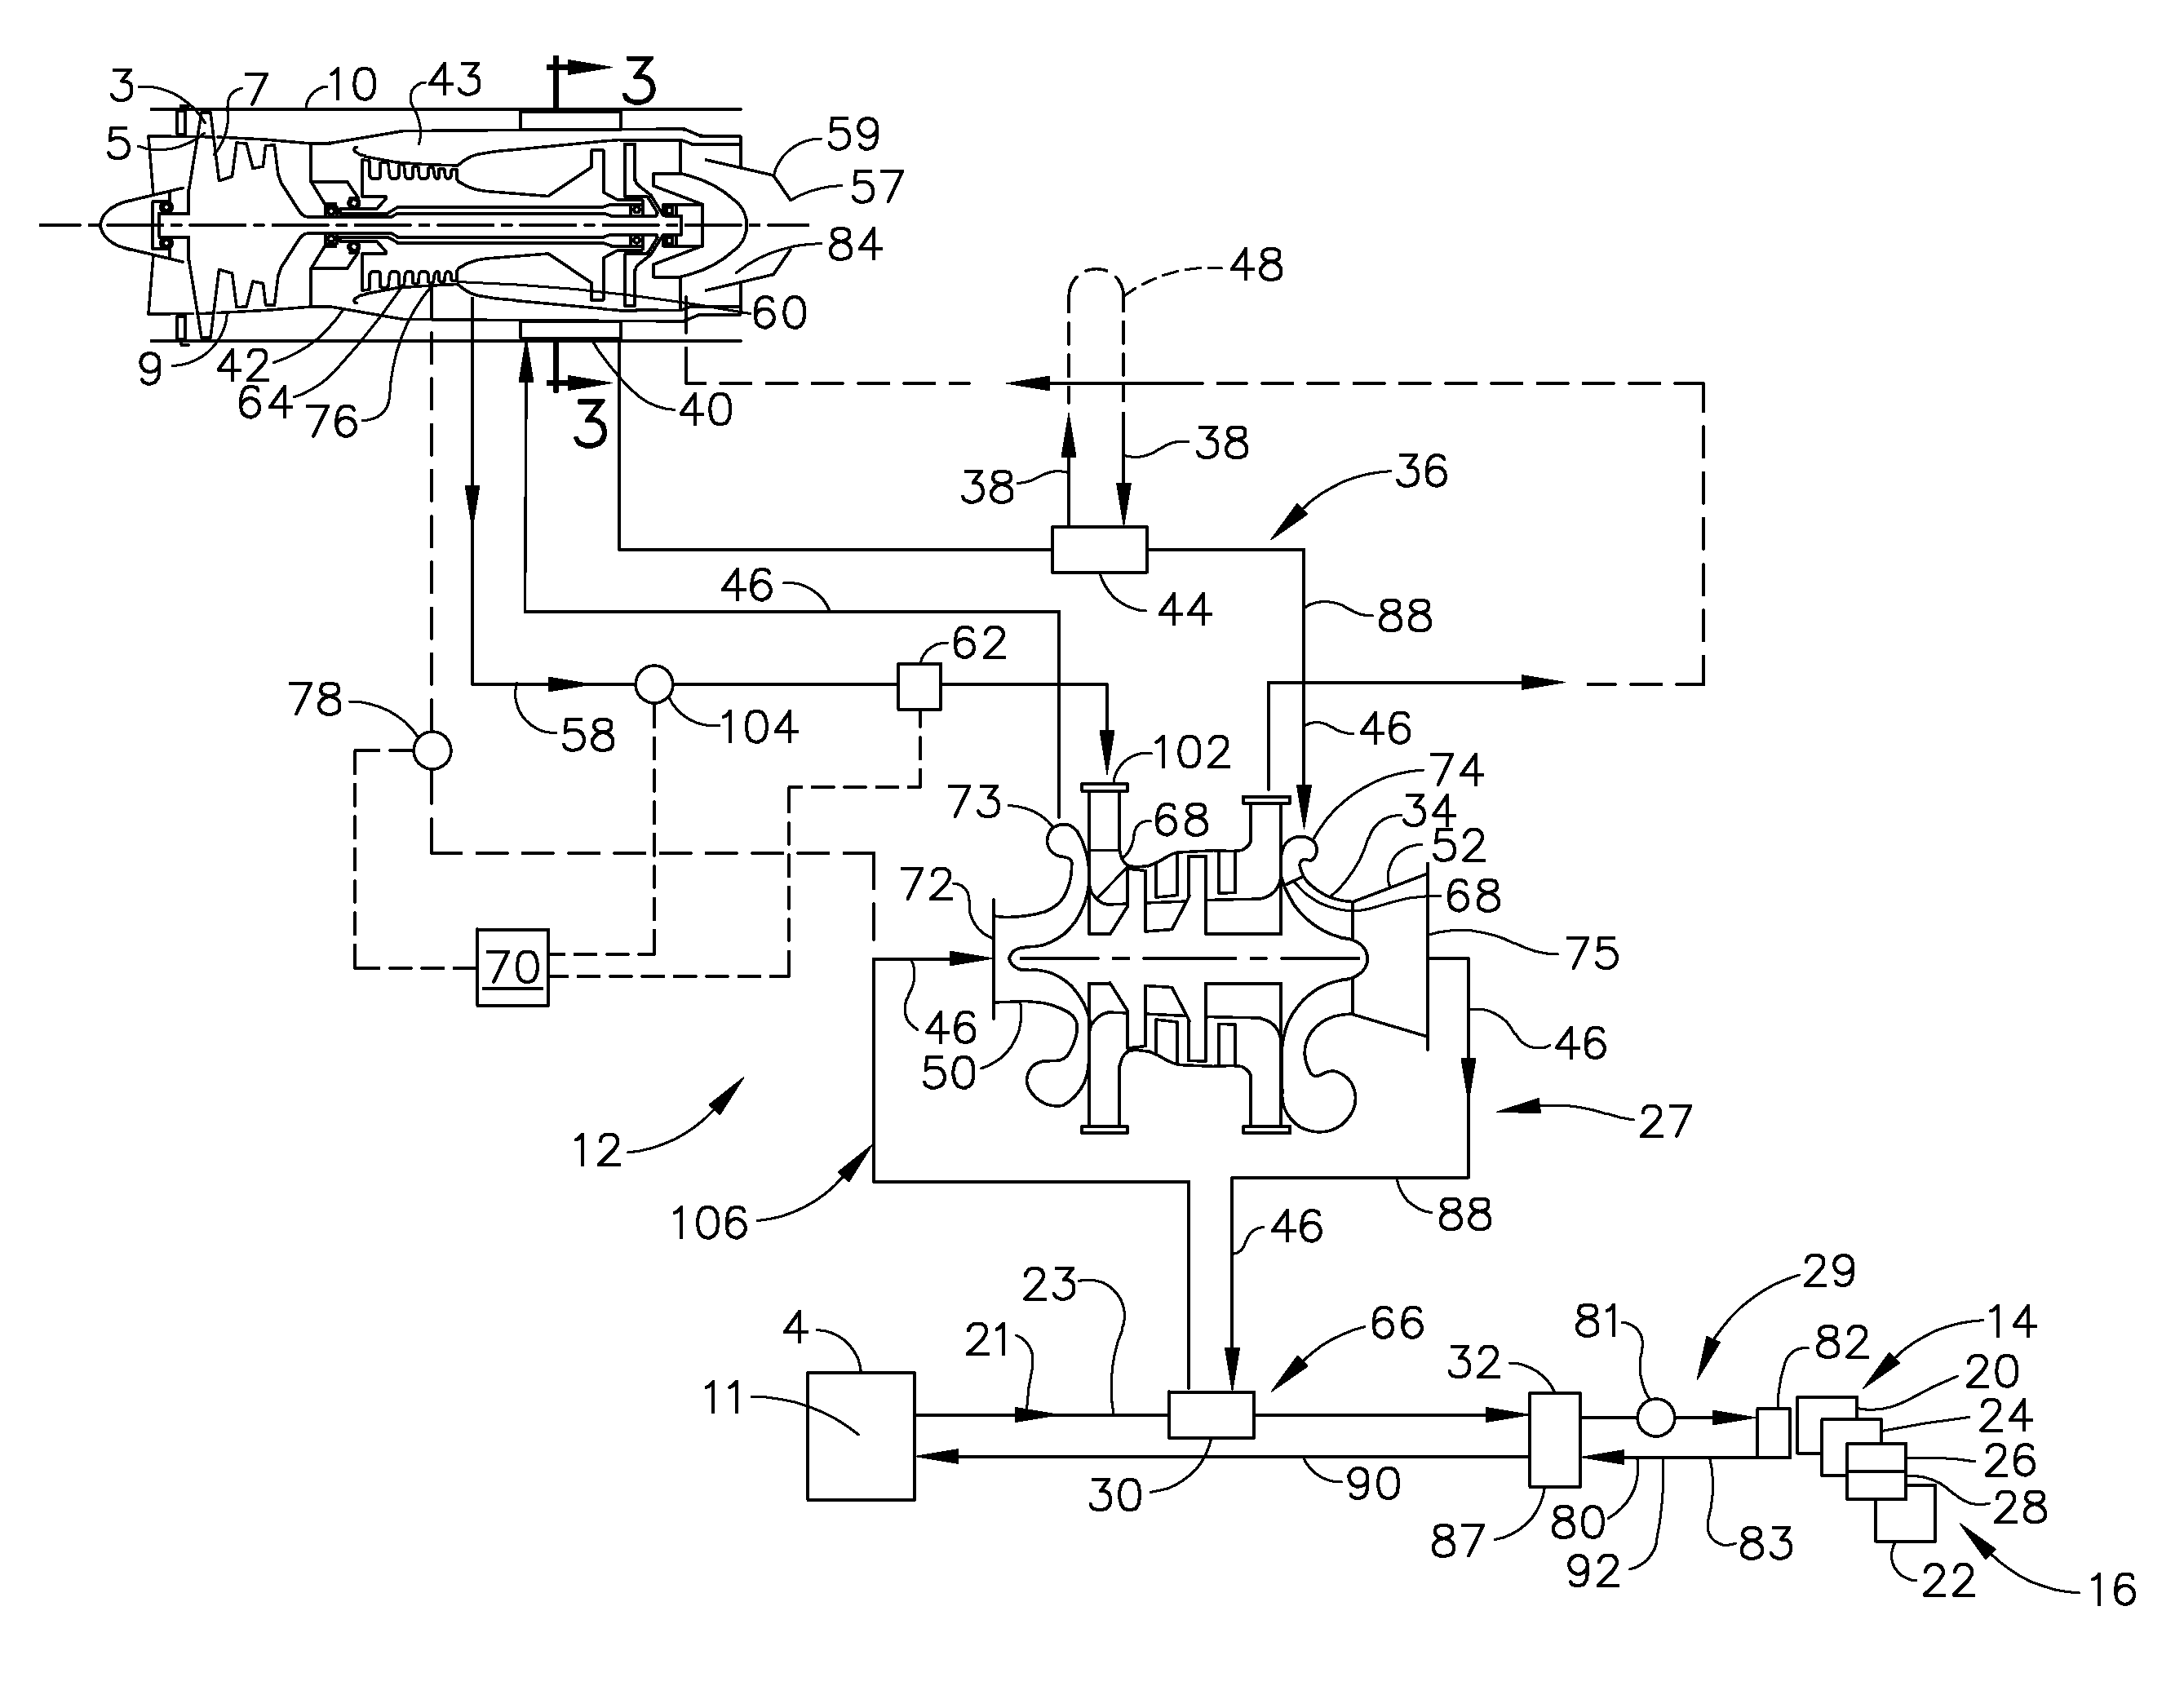 Adaptive power and thermal management system